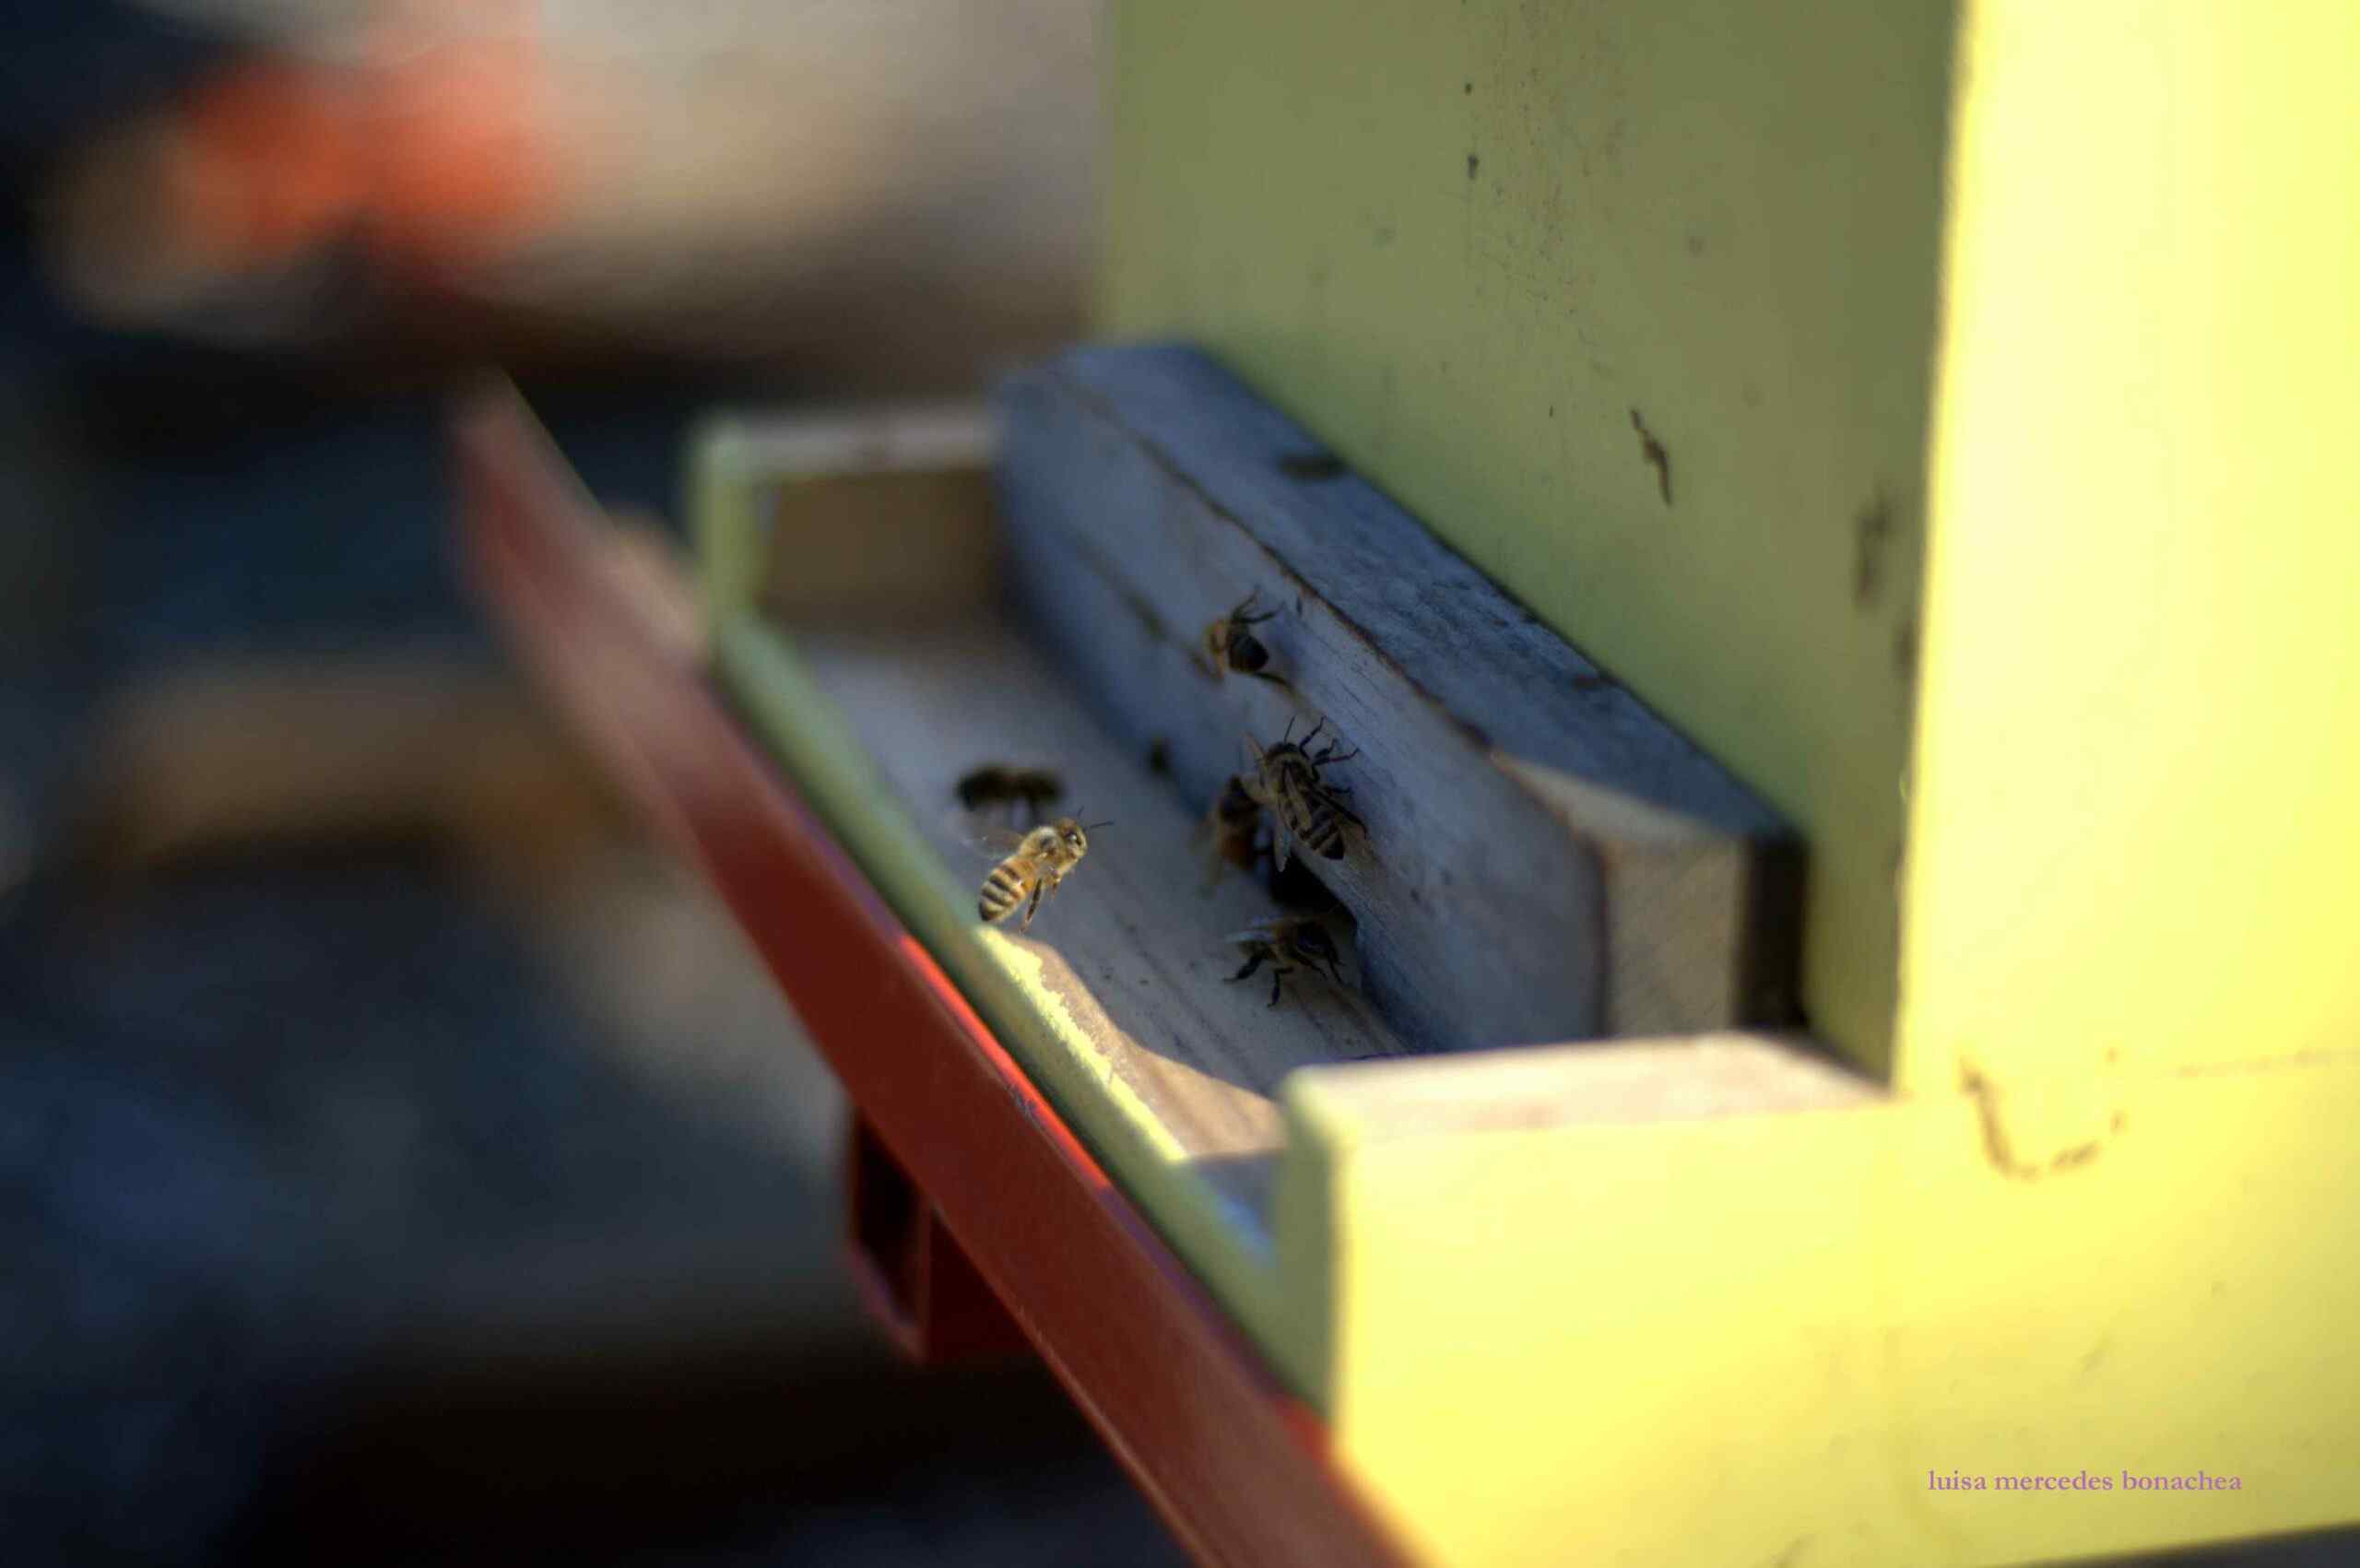 close-up of bees